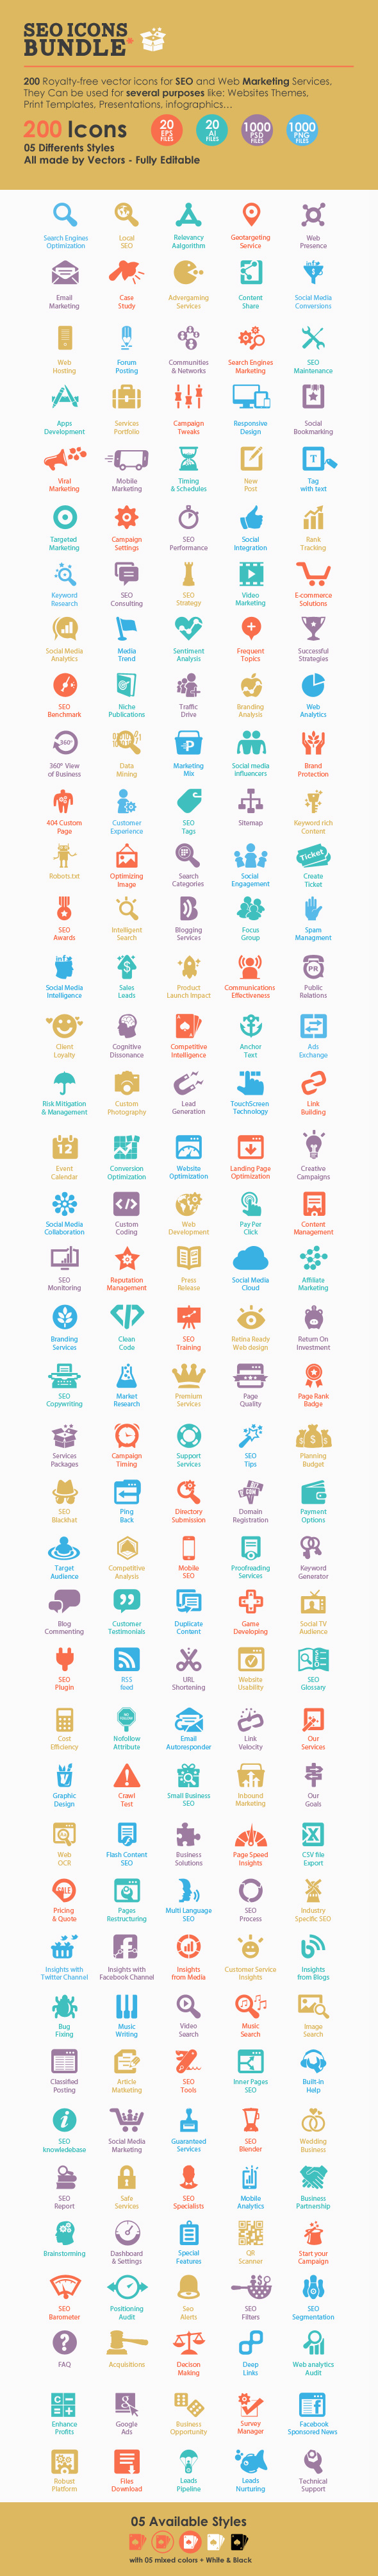 seo icons insights icons bundle Modern Icons seo pack SEO industry icons web icons seo logo flat seo infographics seo services Viral